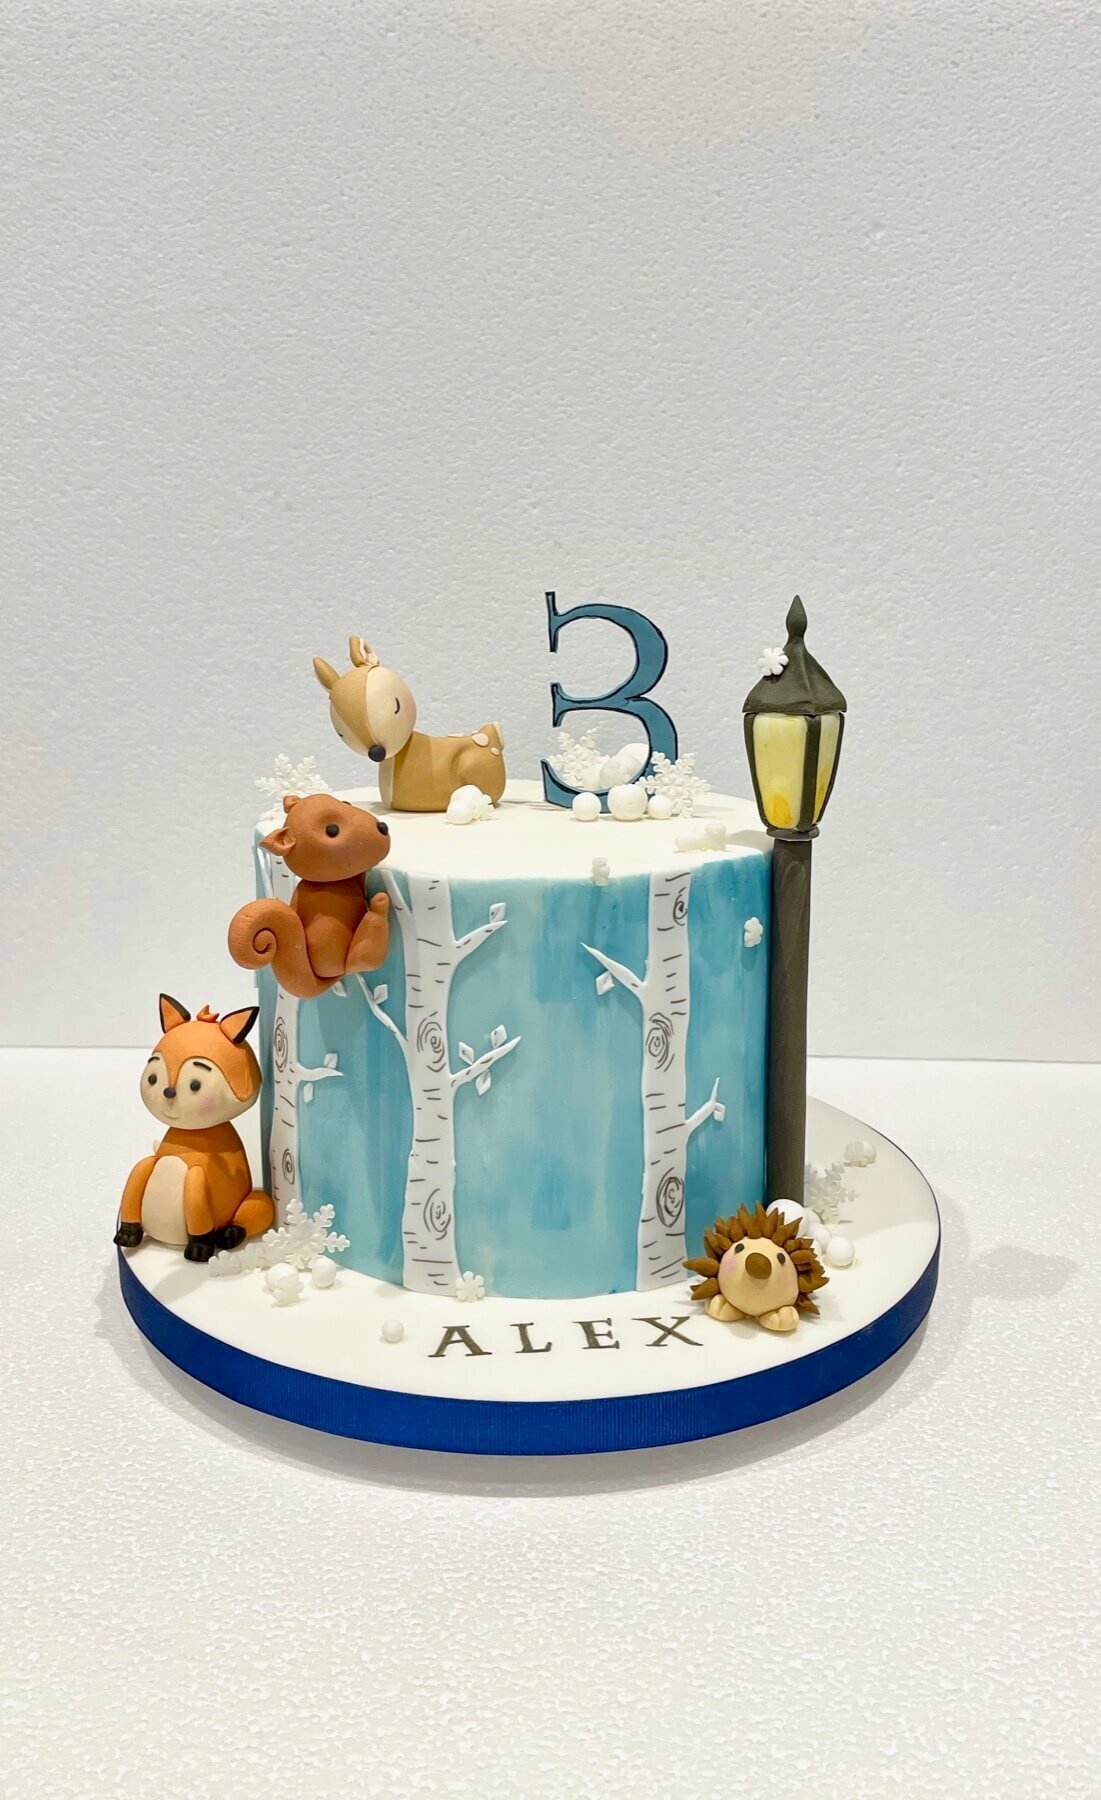 A cute birthday cake with a fox, deer, hedgehog and squirrel